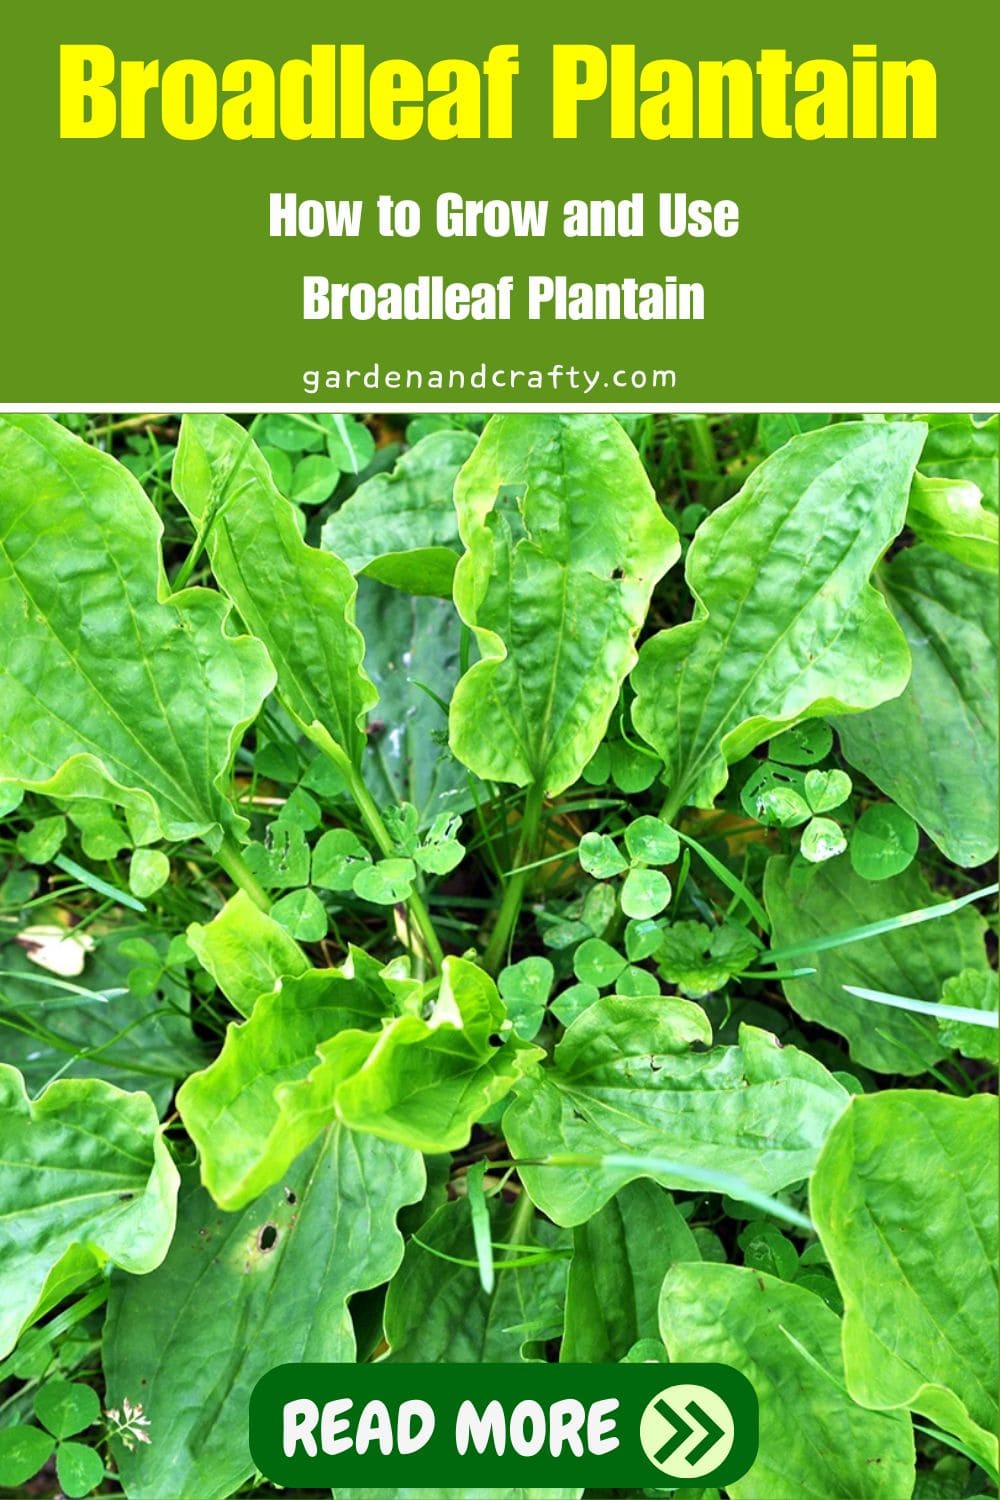 How to Grow and Use Broadleaf Plantain